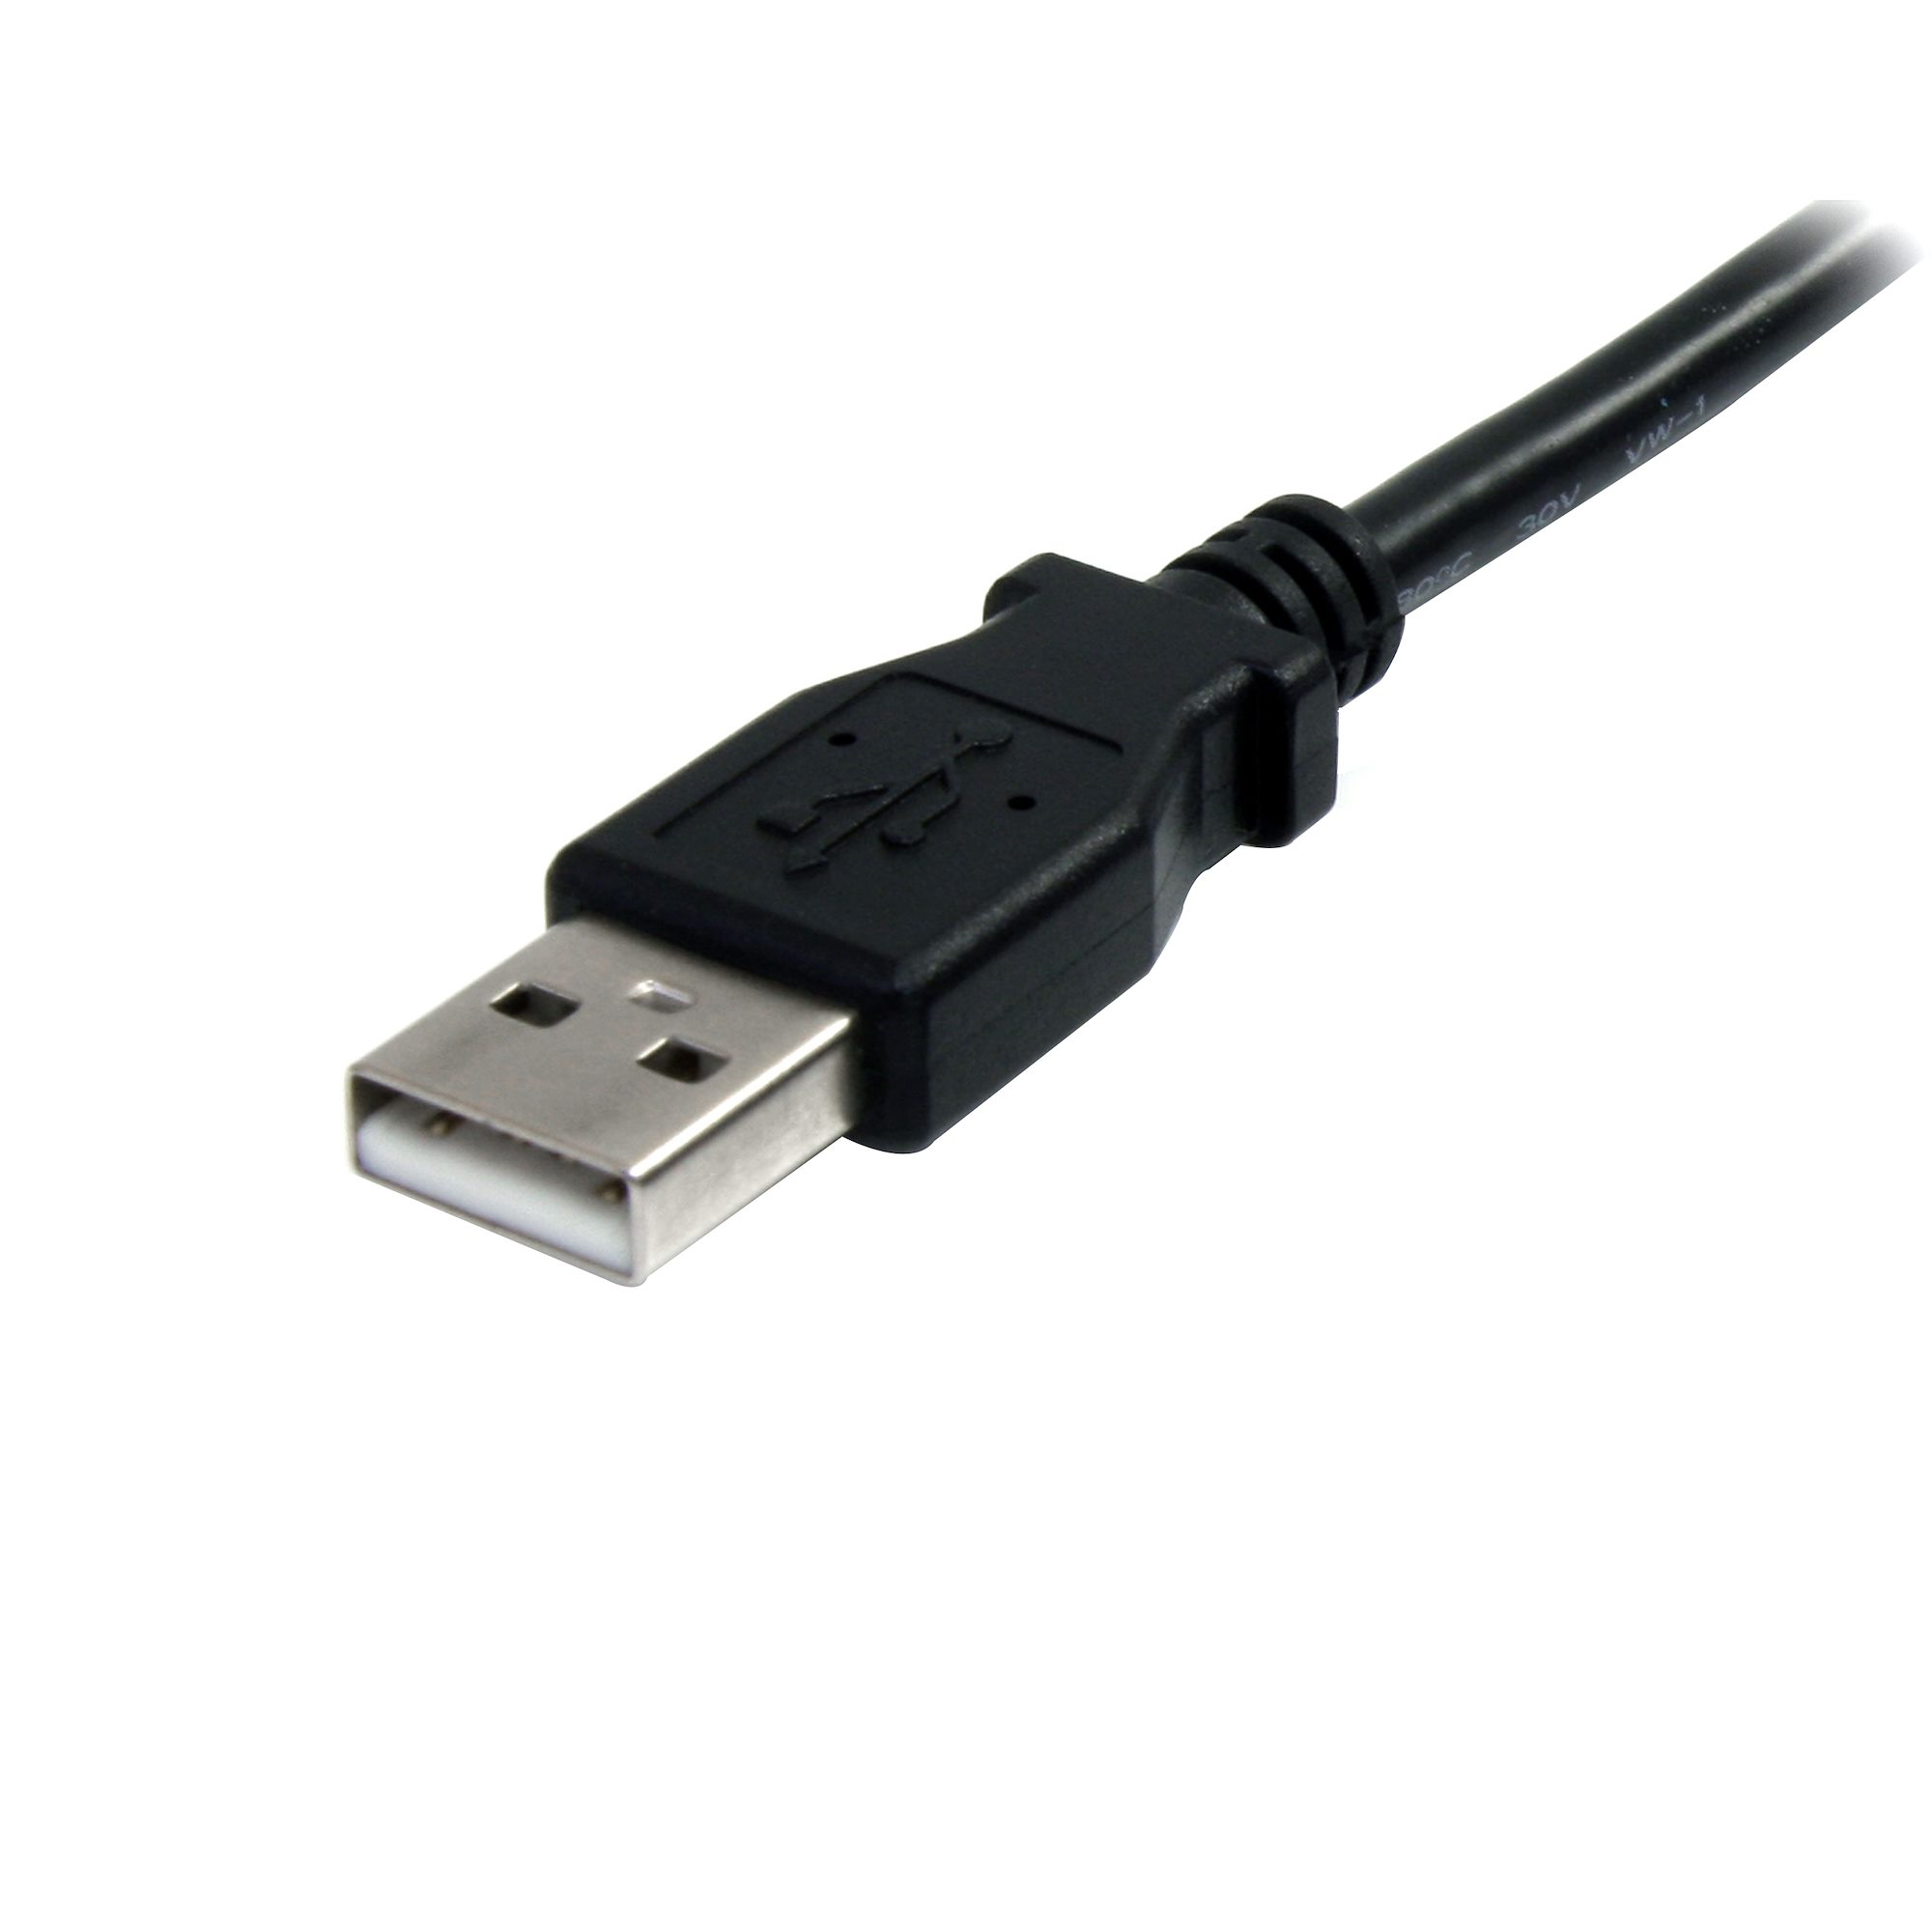 OPQ-Black 10FT USB 2.0 Extension Cable Type A Female to A Male Cable Black Color: Black Lysee Data Cables